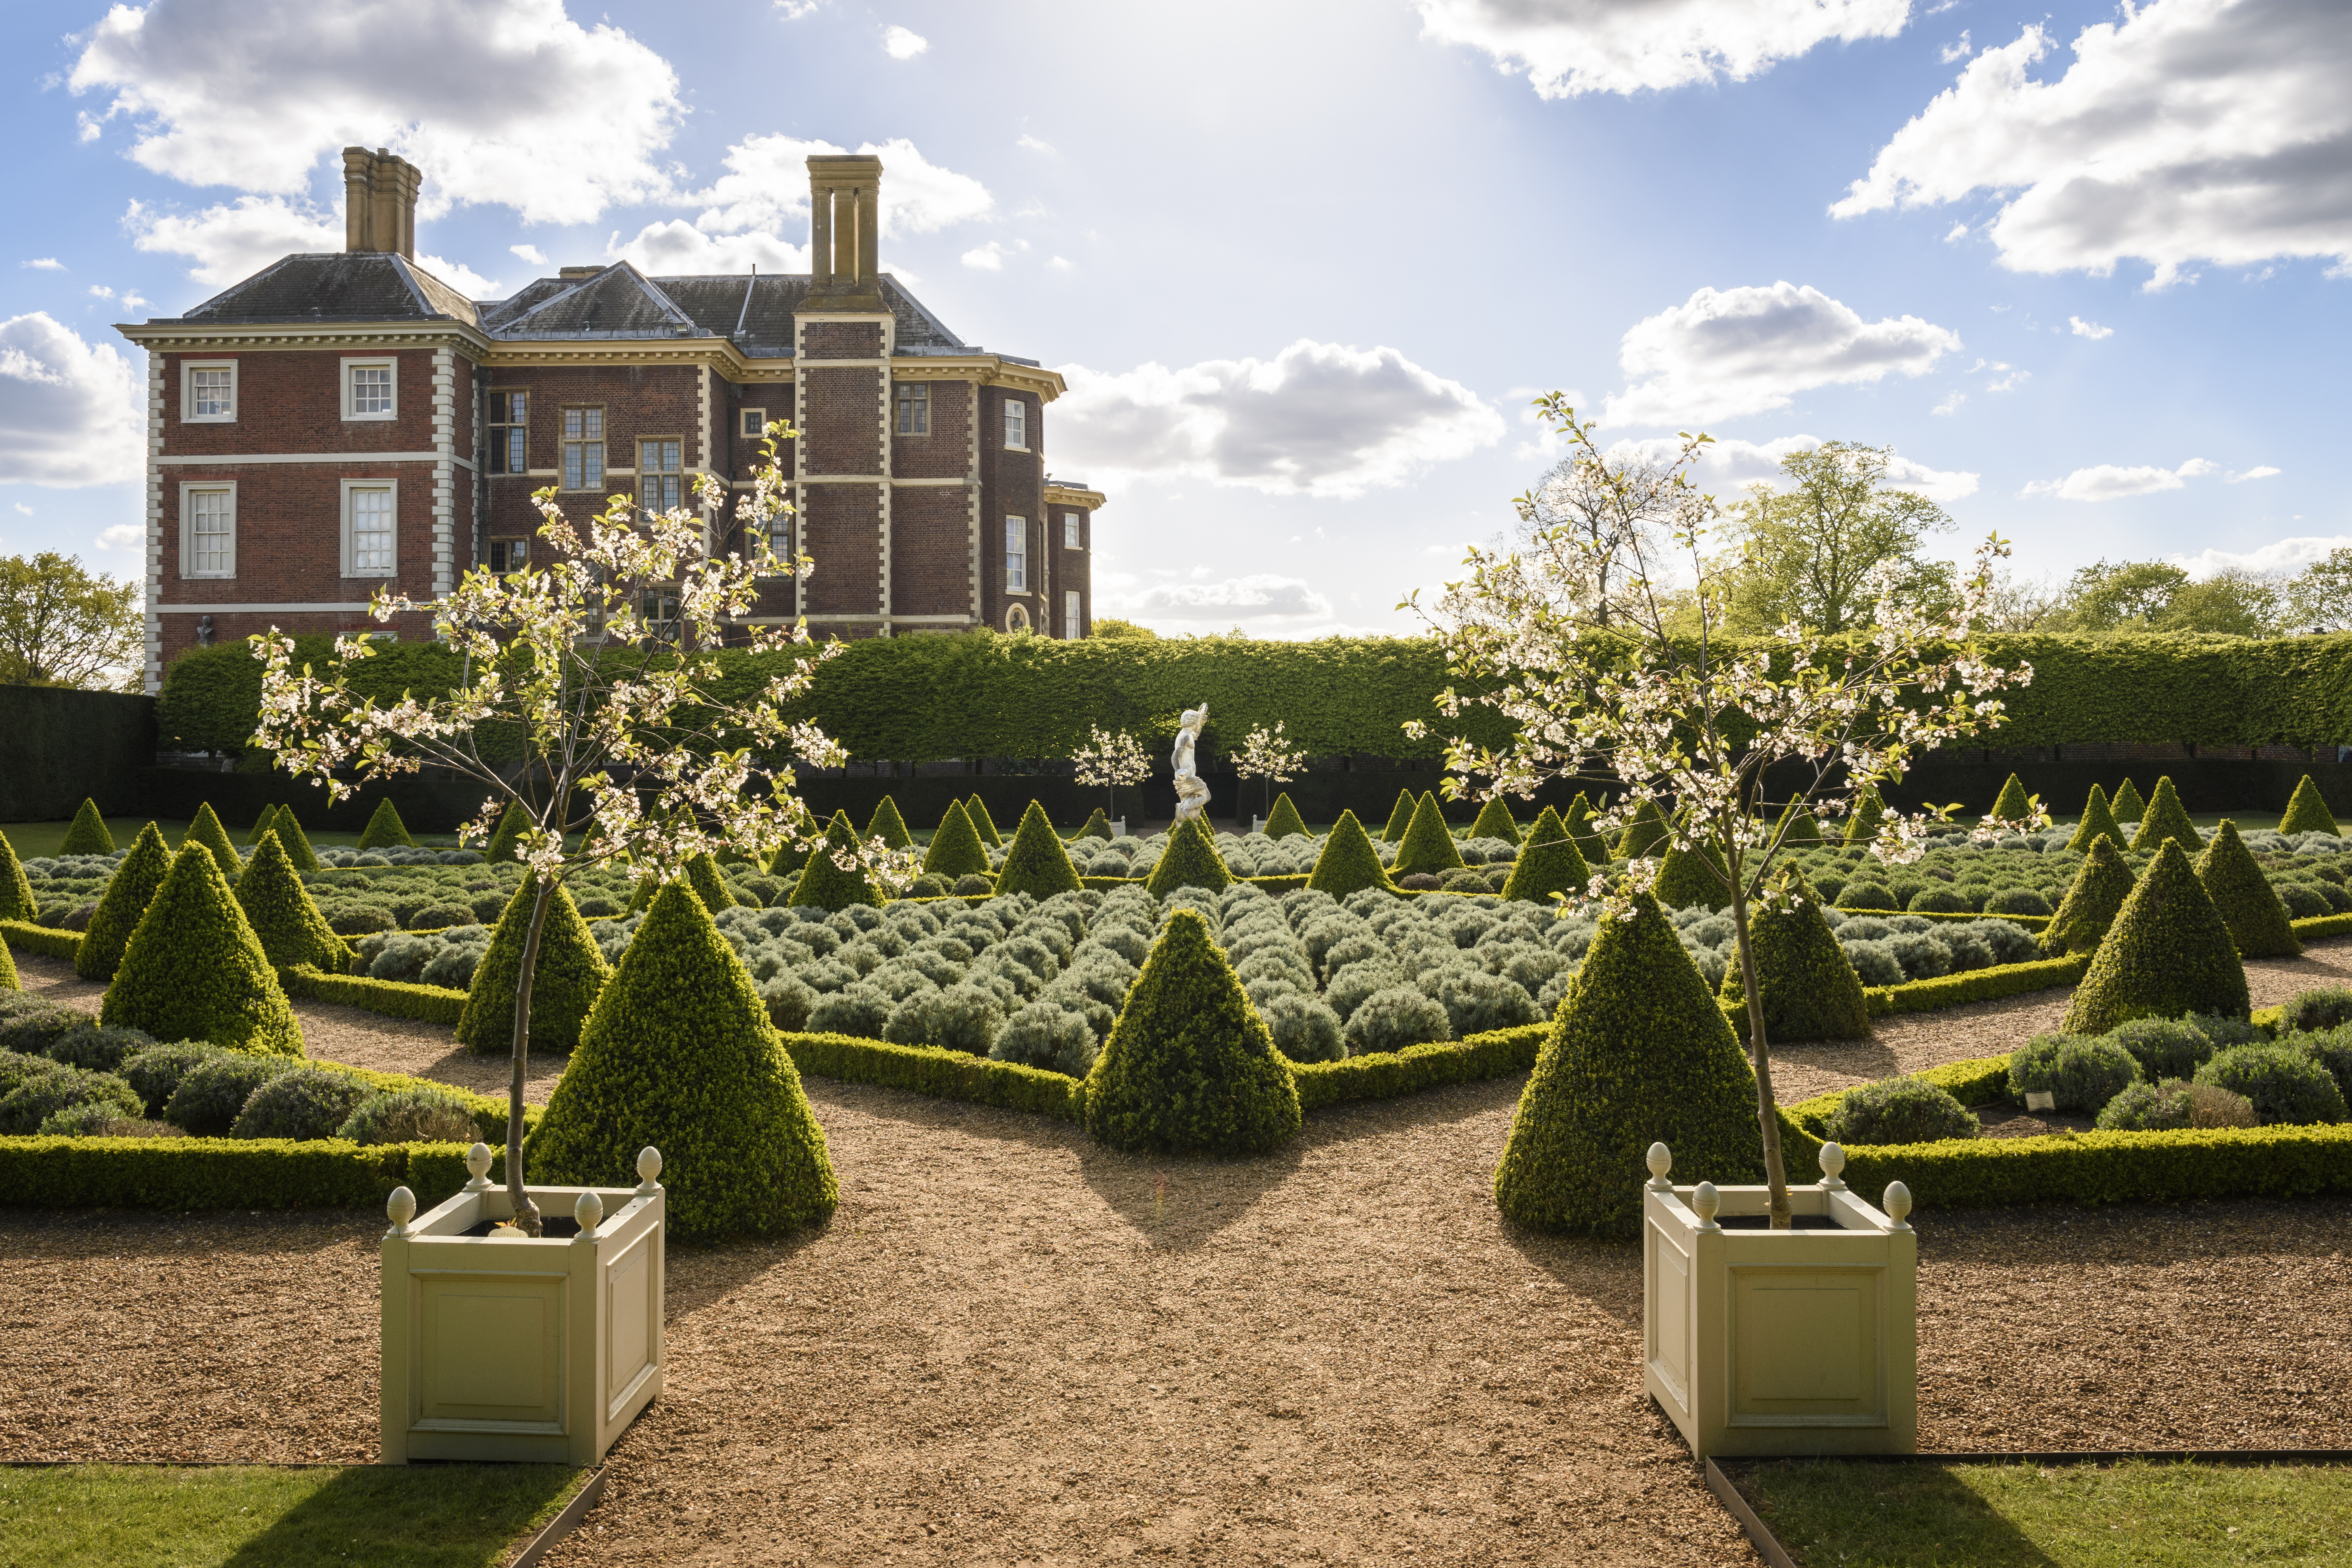 The Cherry Garden at Ham House and Garden, London, which faces increasing heat